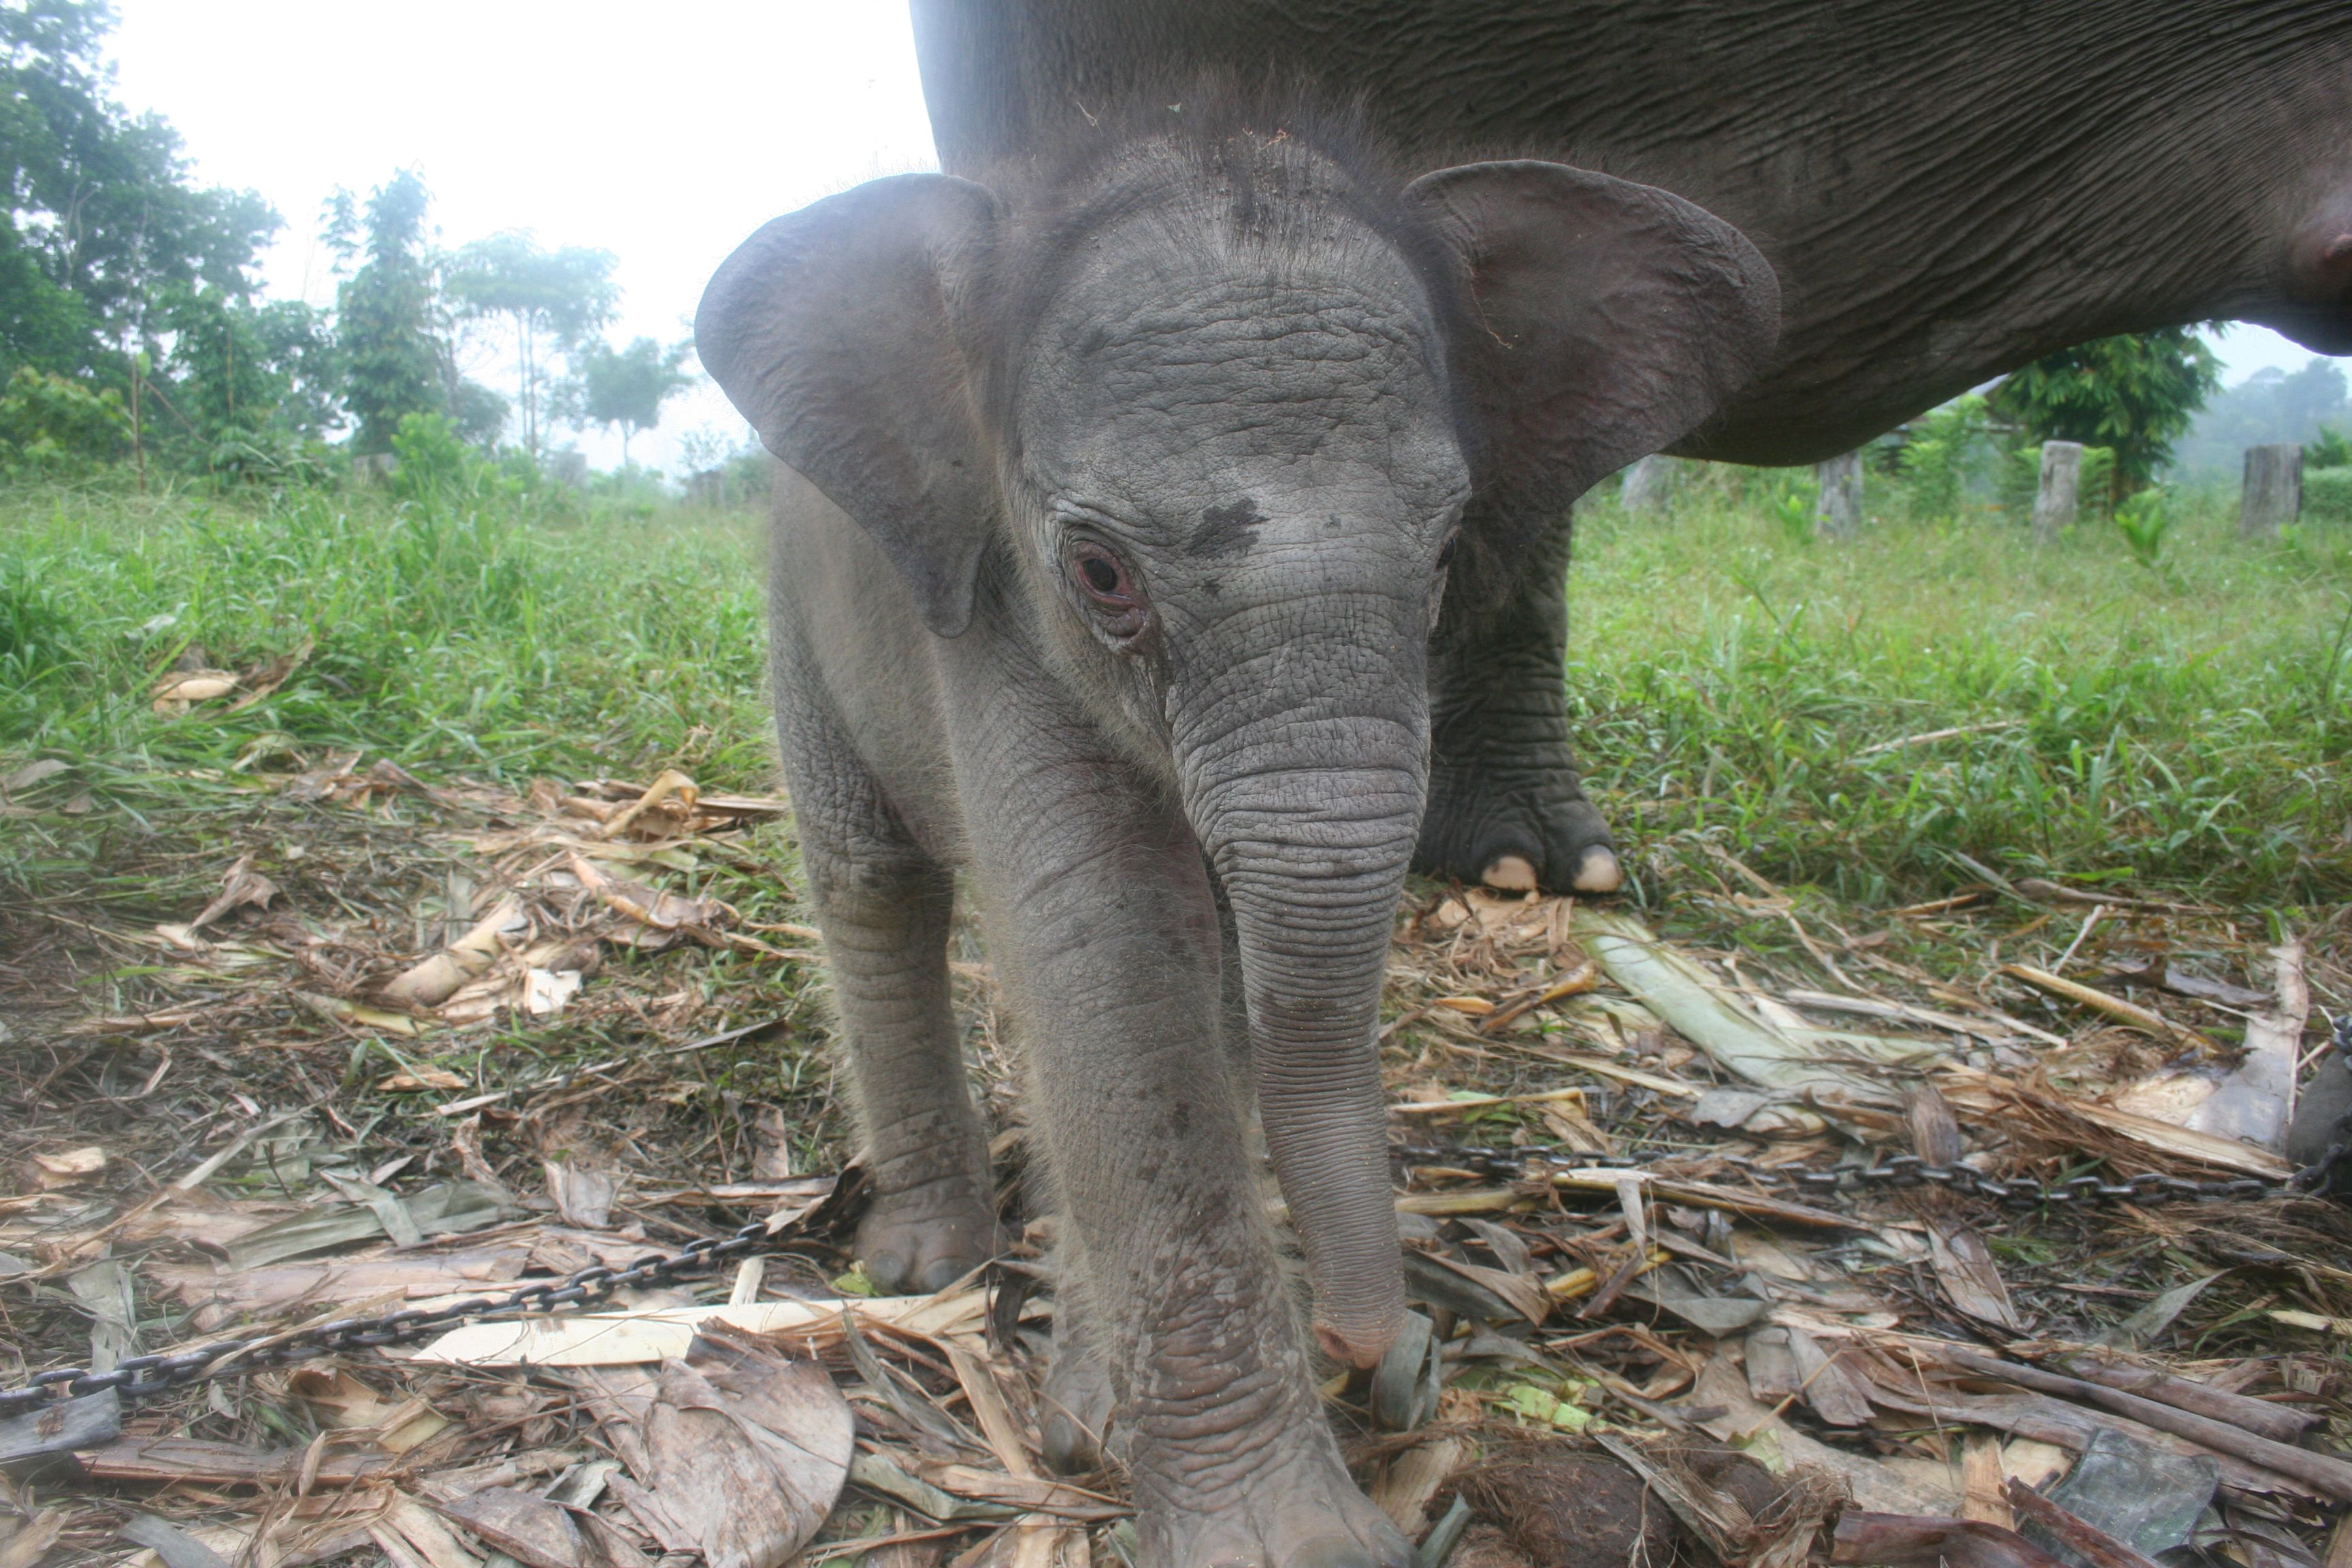 What is a word to describe a baby elephant?